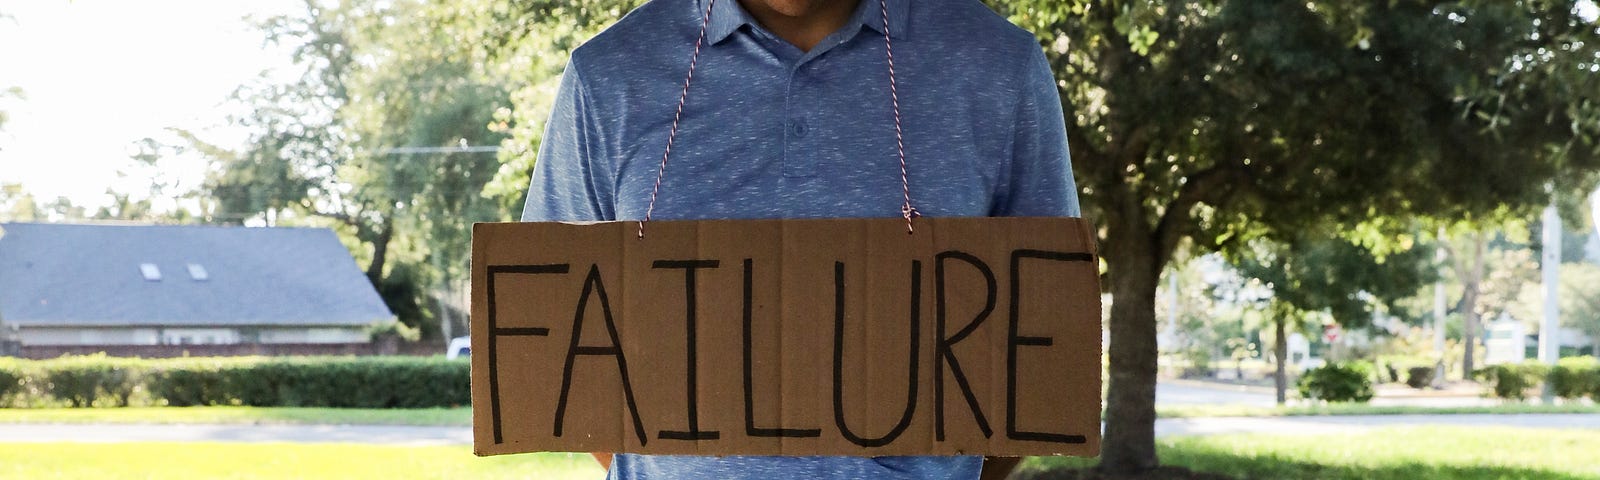 A man with a cardboard sign necklace that reads “failure.”